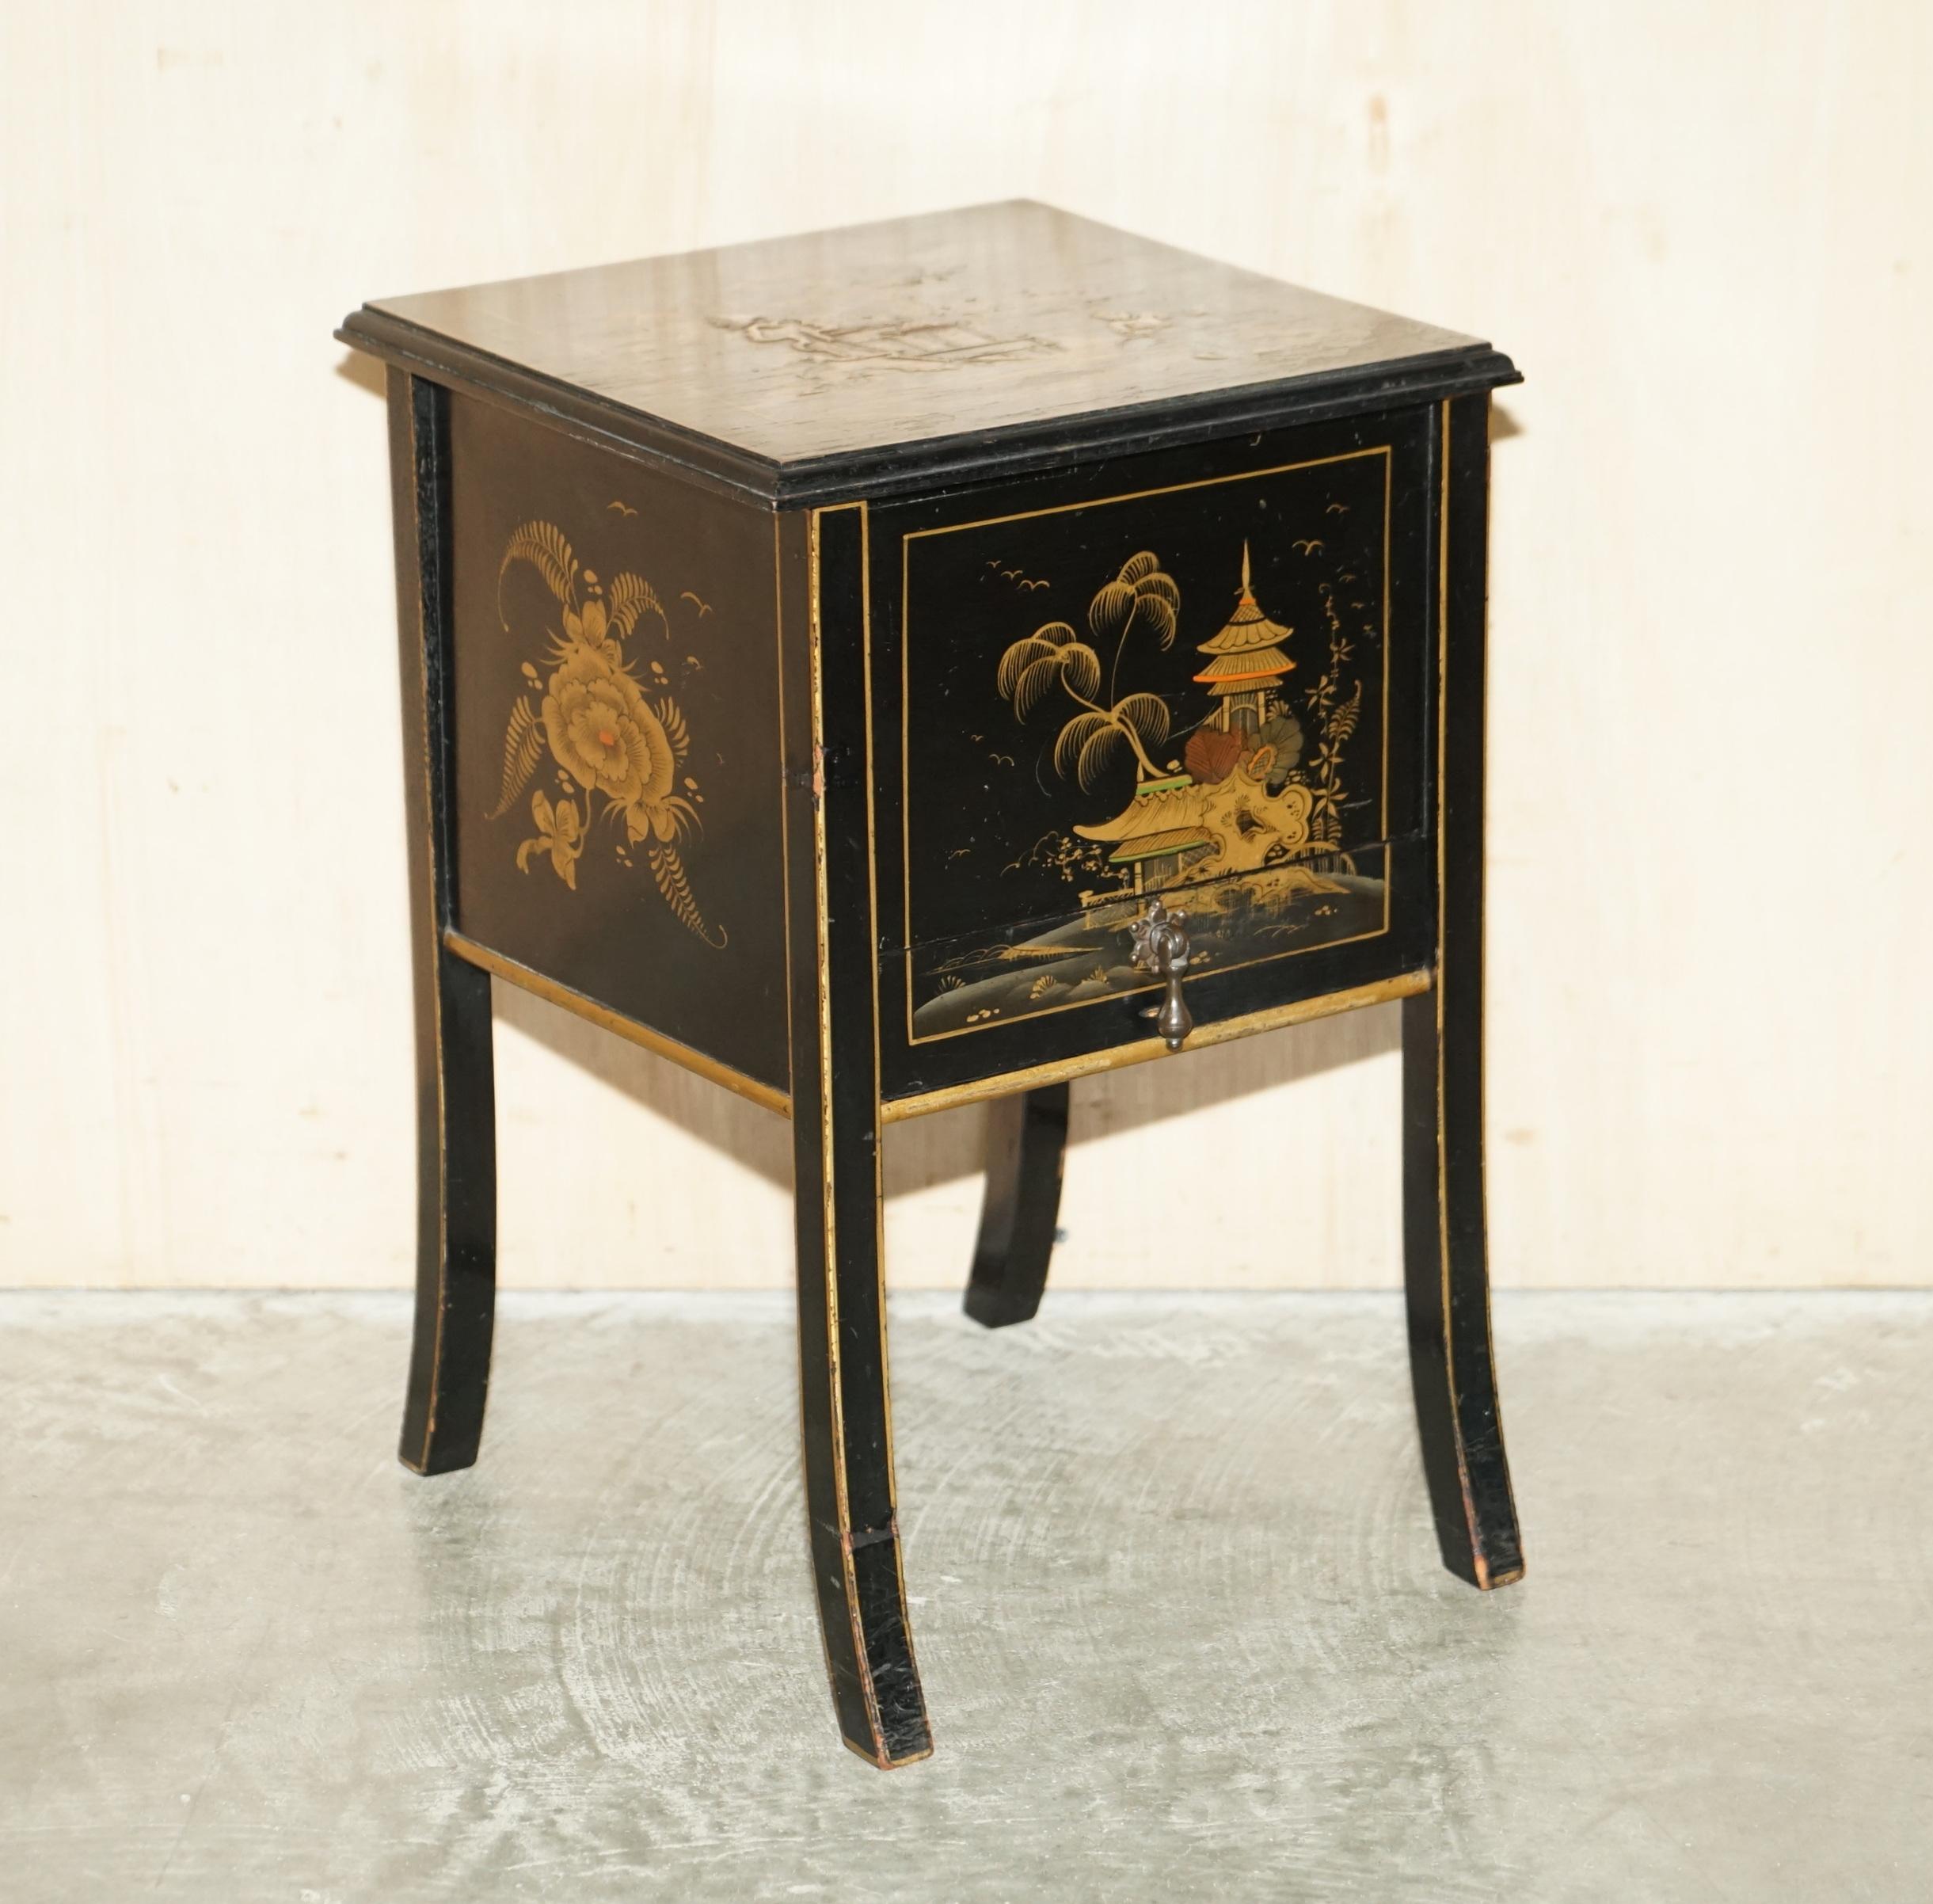 We are delighted to offer for sale this lovely circa 1880 hand made Chinese Chinoiserie work / sewing table with silk lining.

A very good looking and well made piece, the finish is 100% original and untouched, it looks every bit of its 120-140